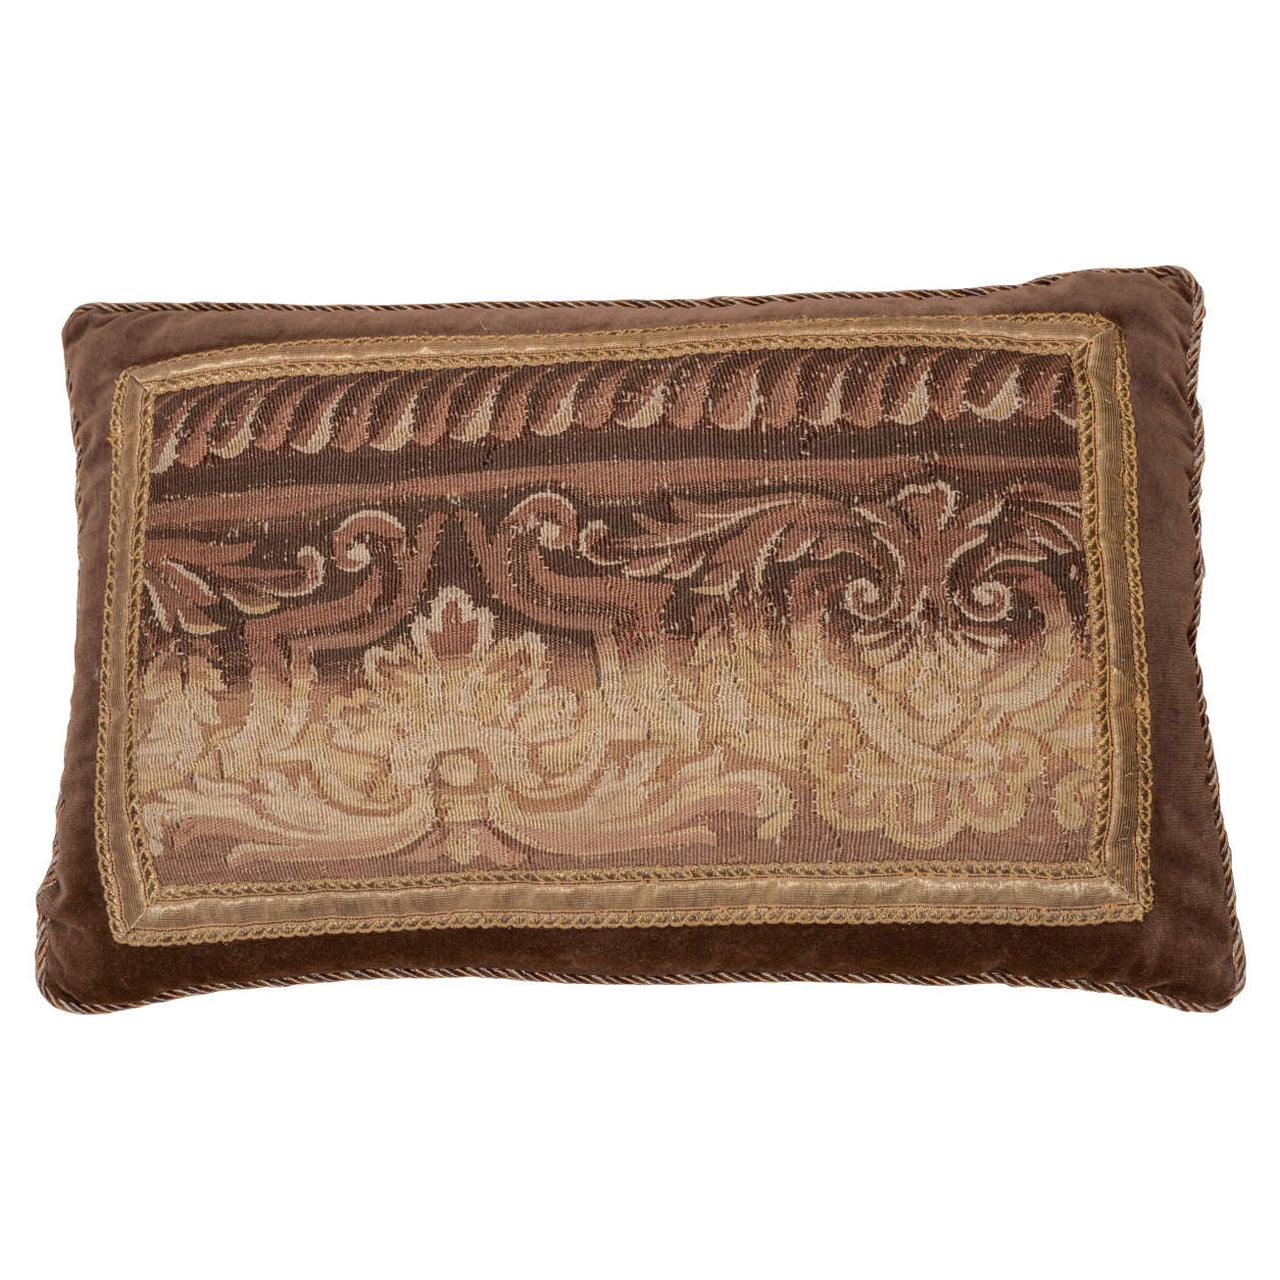 18th Century Tapestry Fragment Pillow For Sale